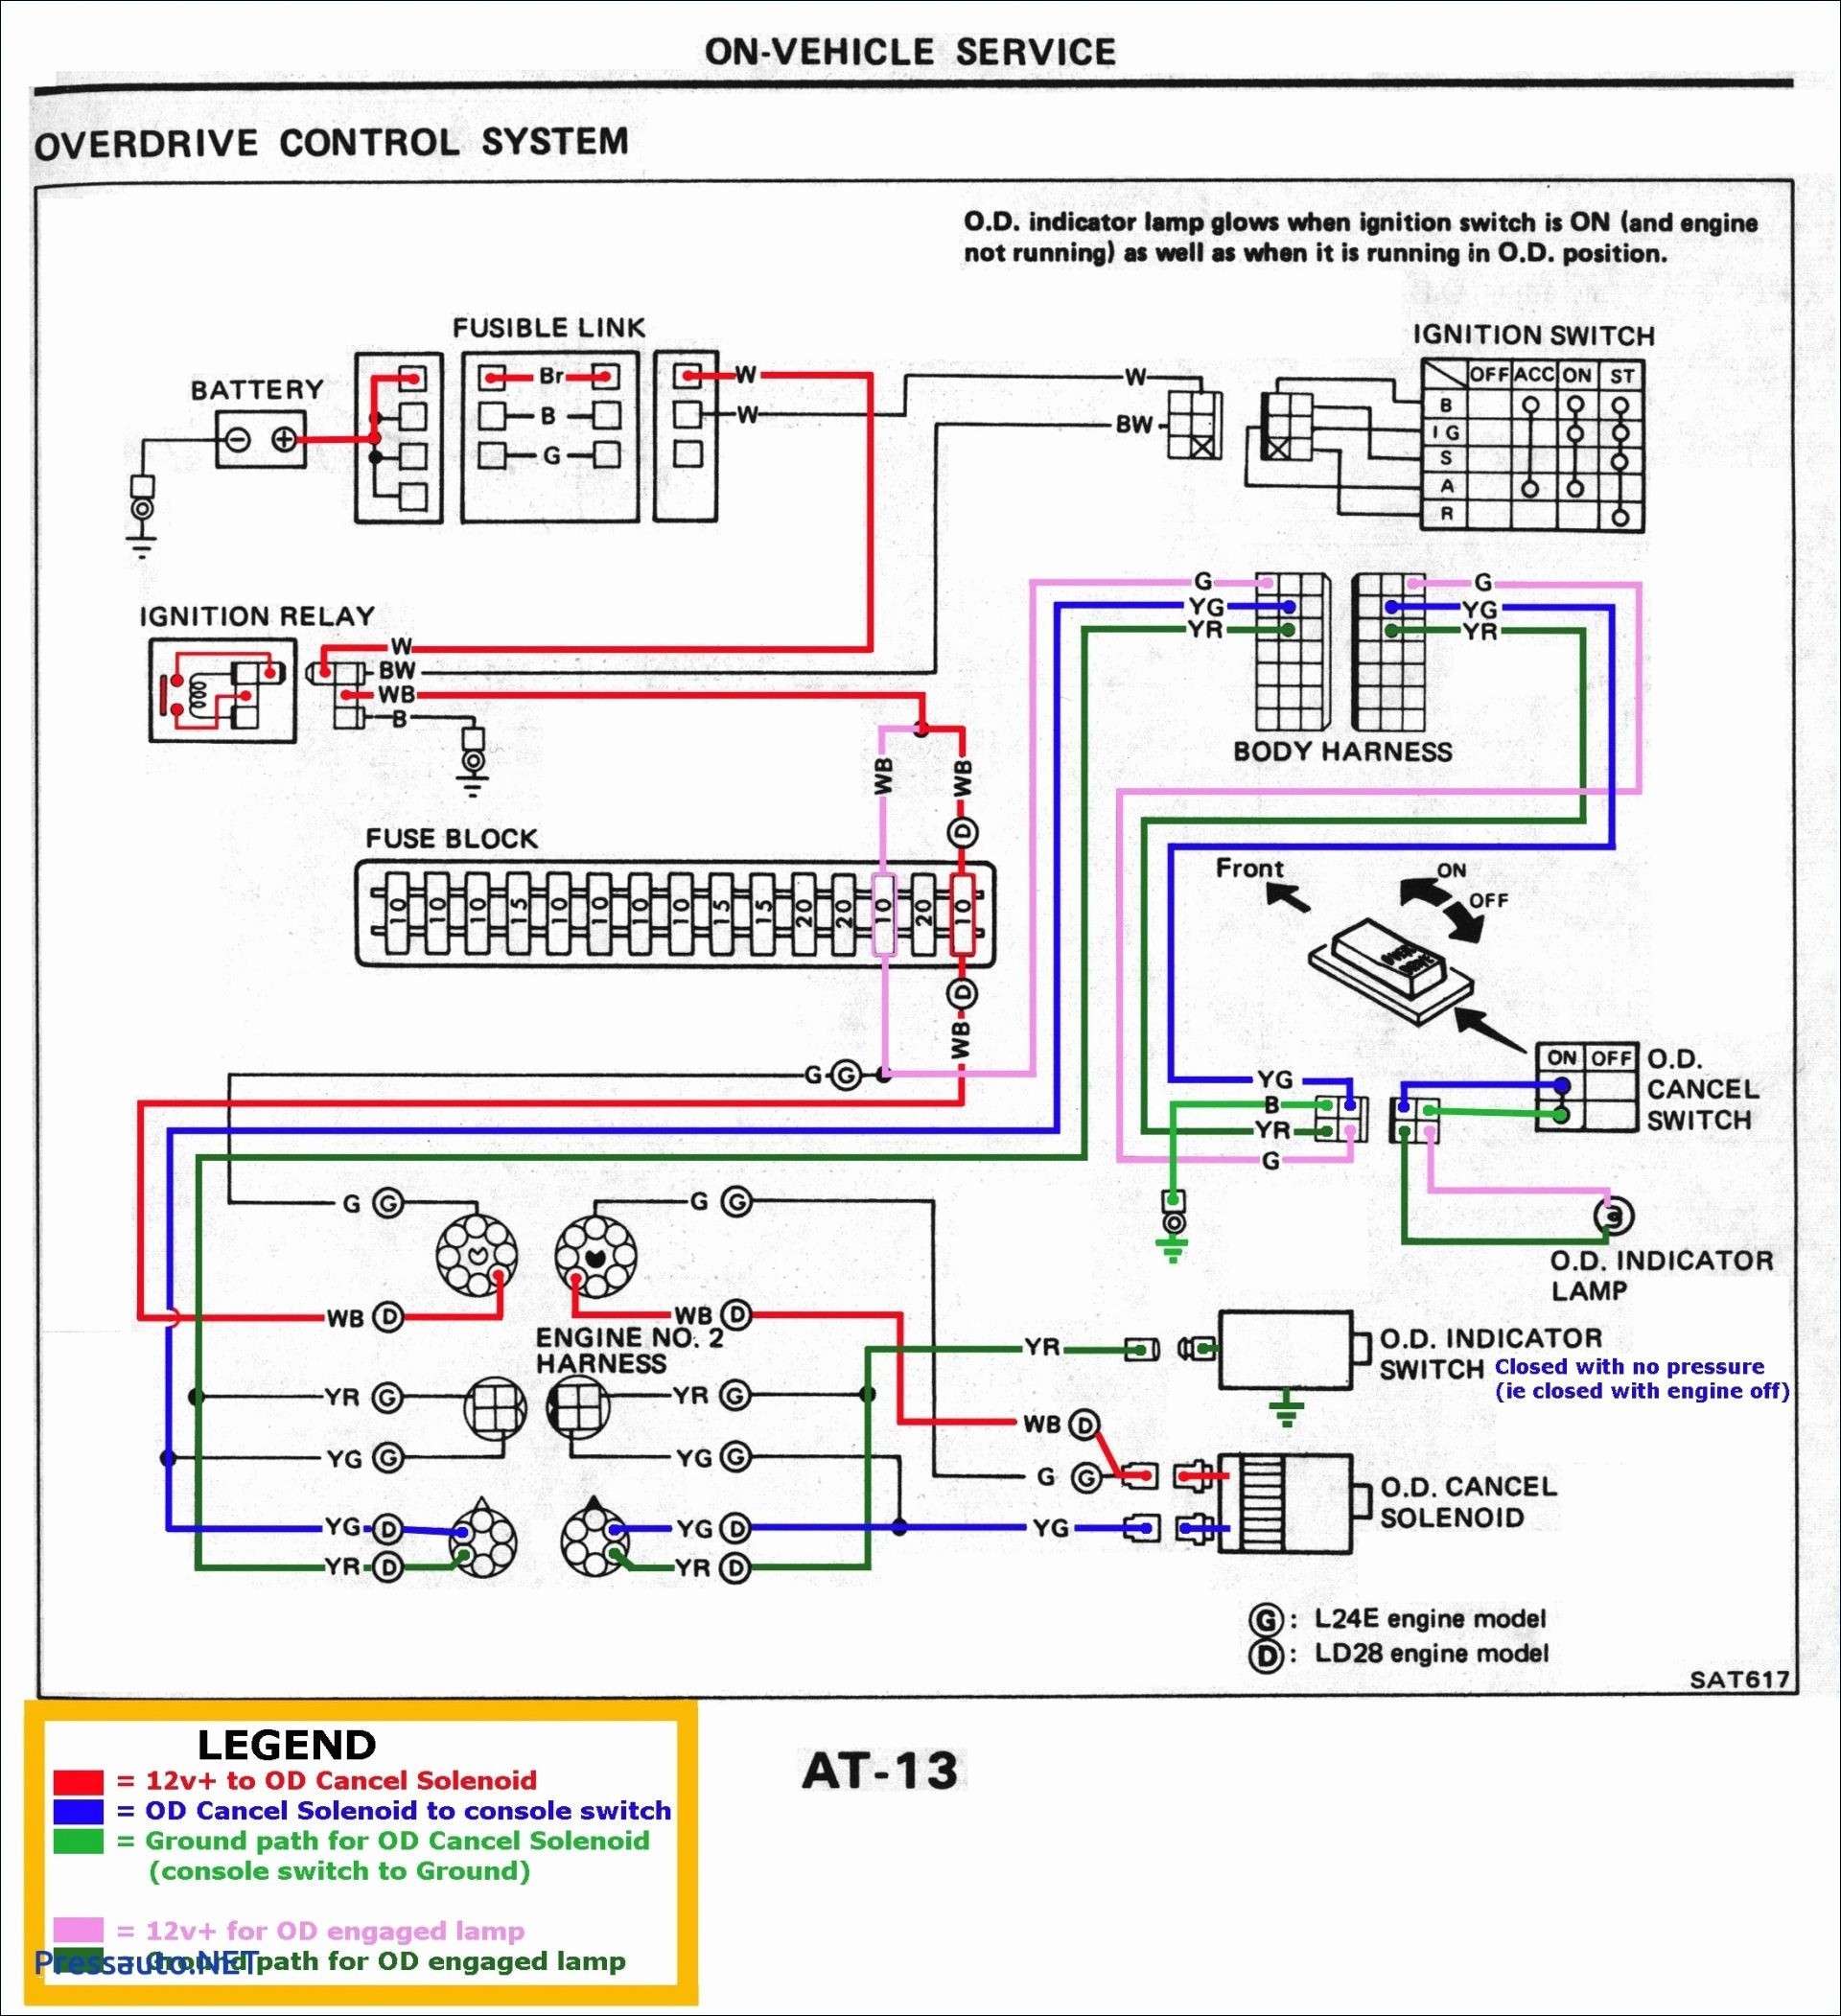 Wiring Diagram for A Doorbell Save Wiring Diagram Doorbell Two Chimes Fresh Wiring Diagram Doorbell